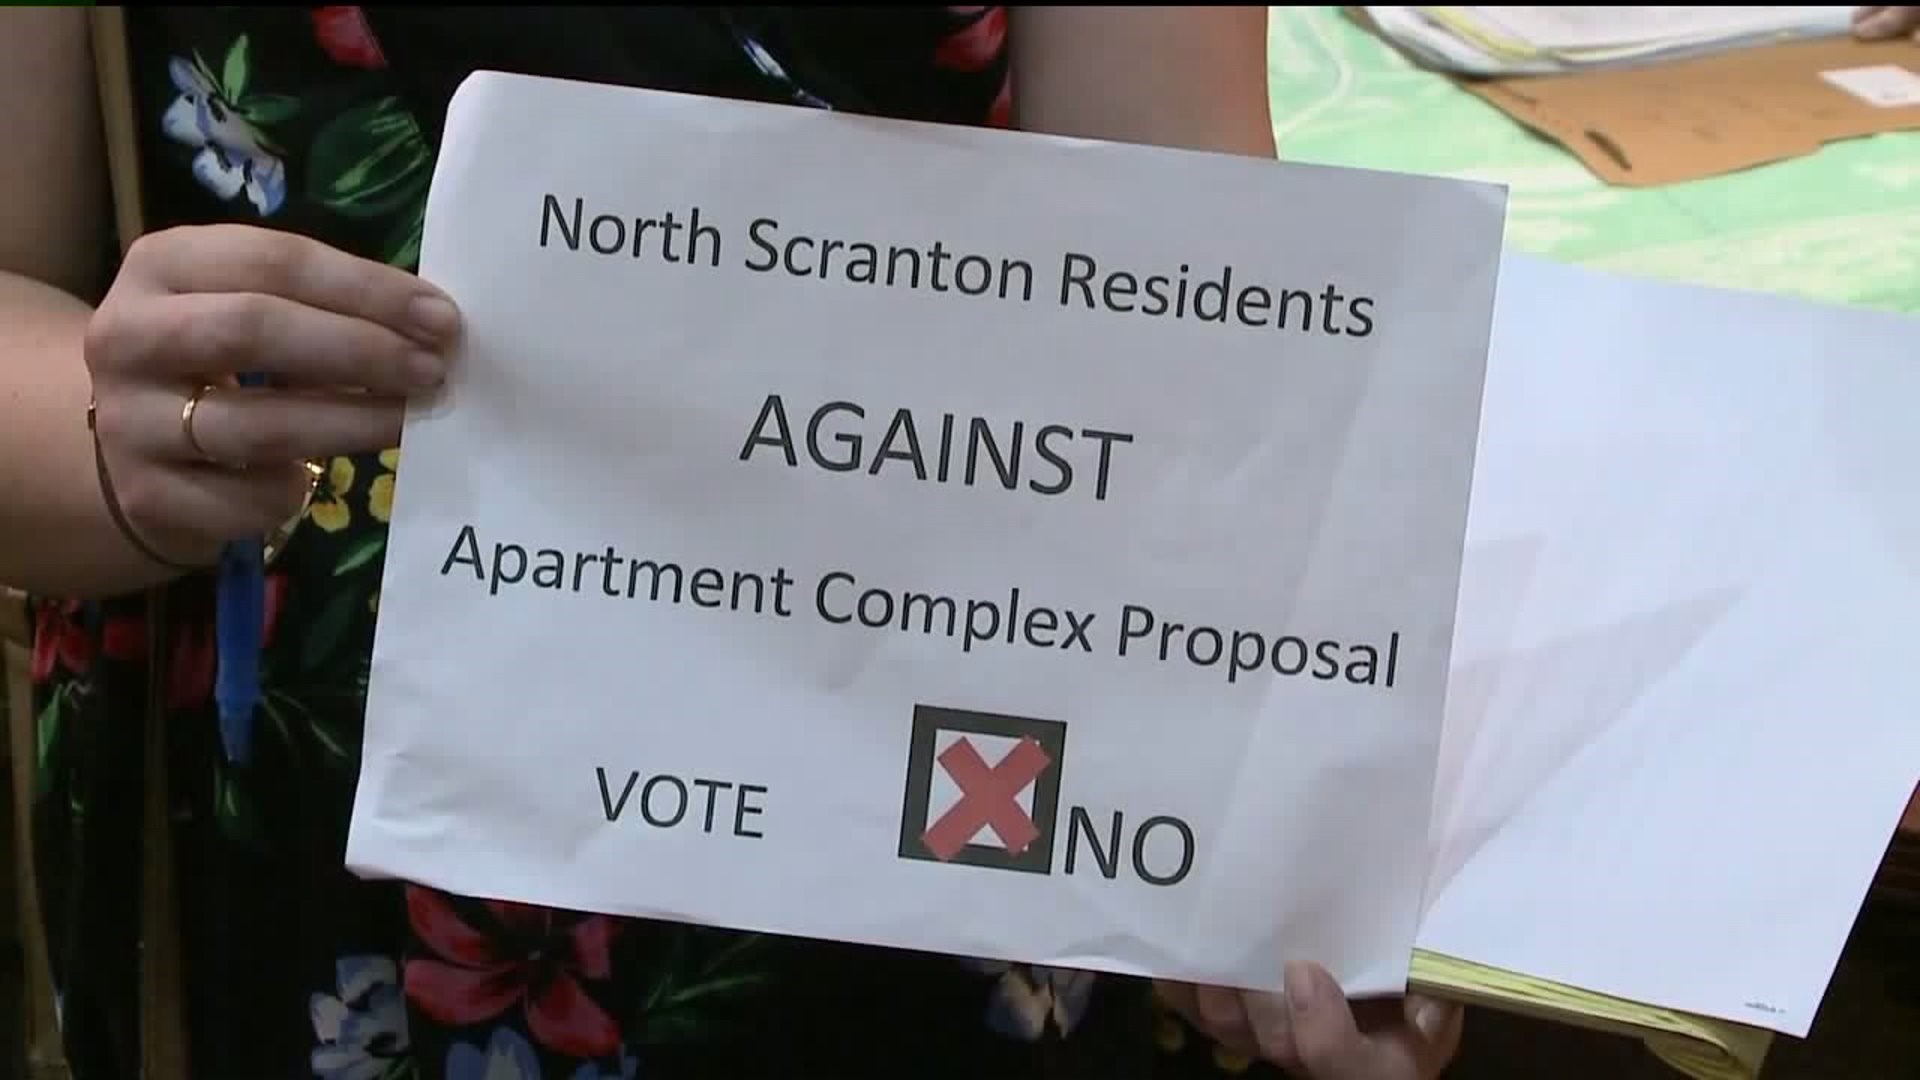 Tempers Flare as North Scranton Residents Make Clear Their Opposition to Proposed Apartments